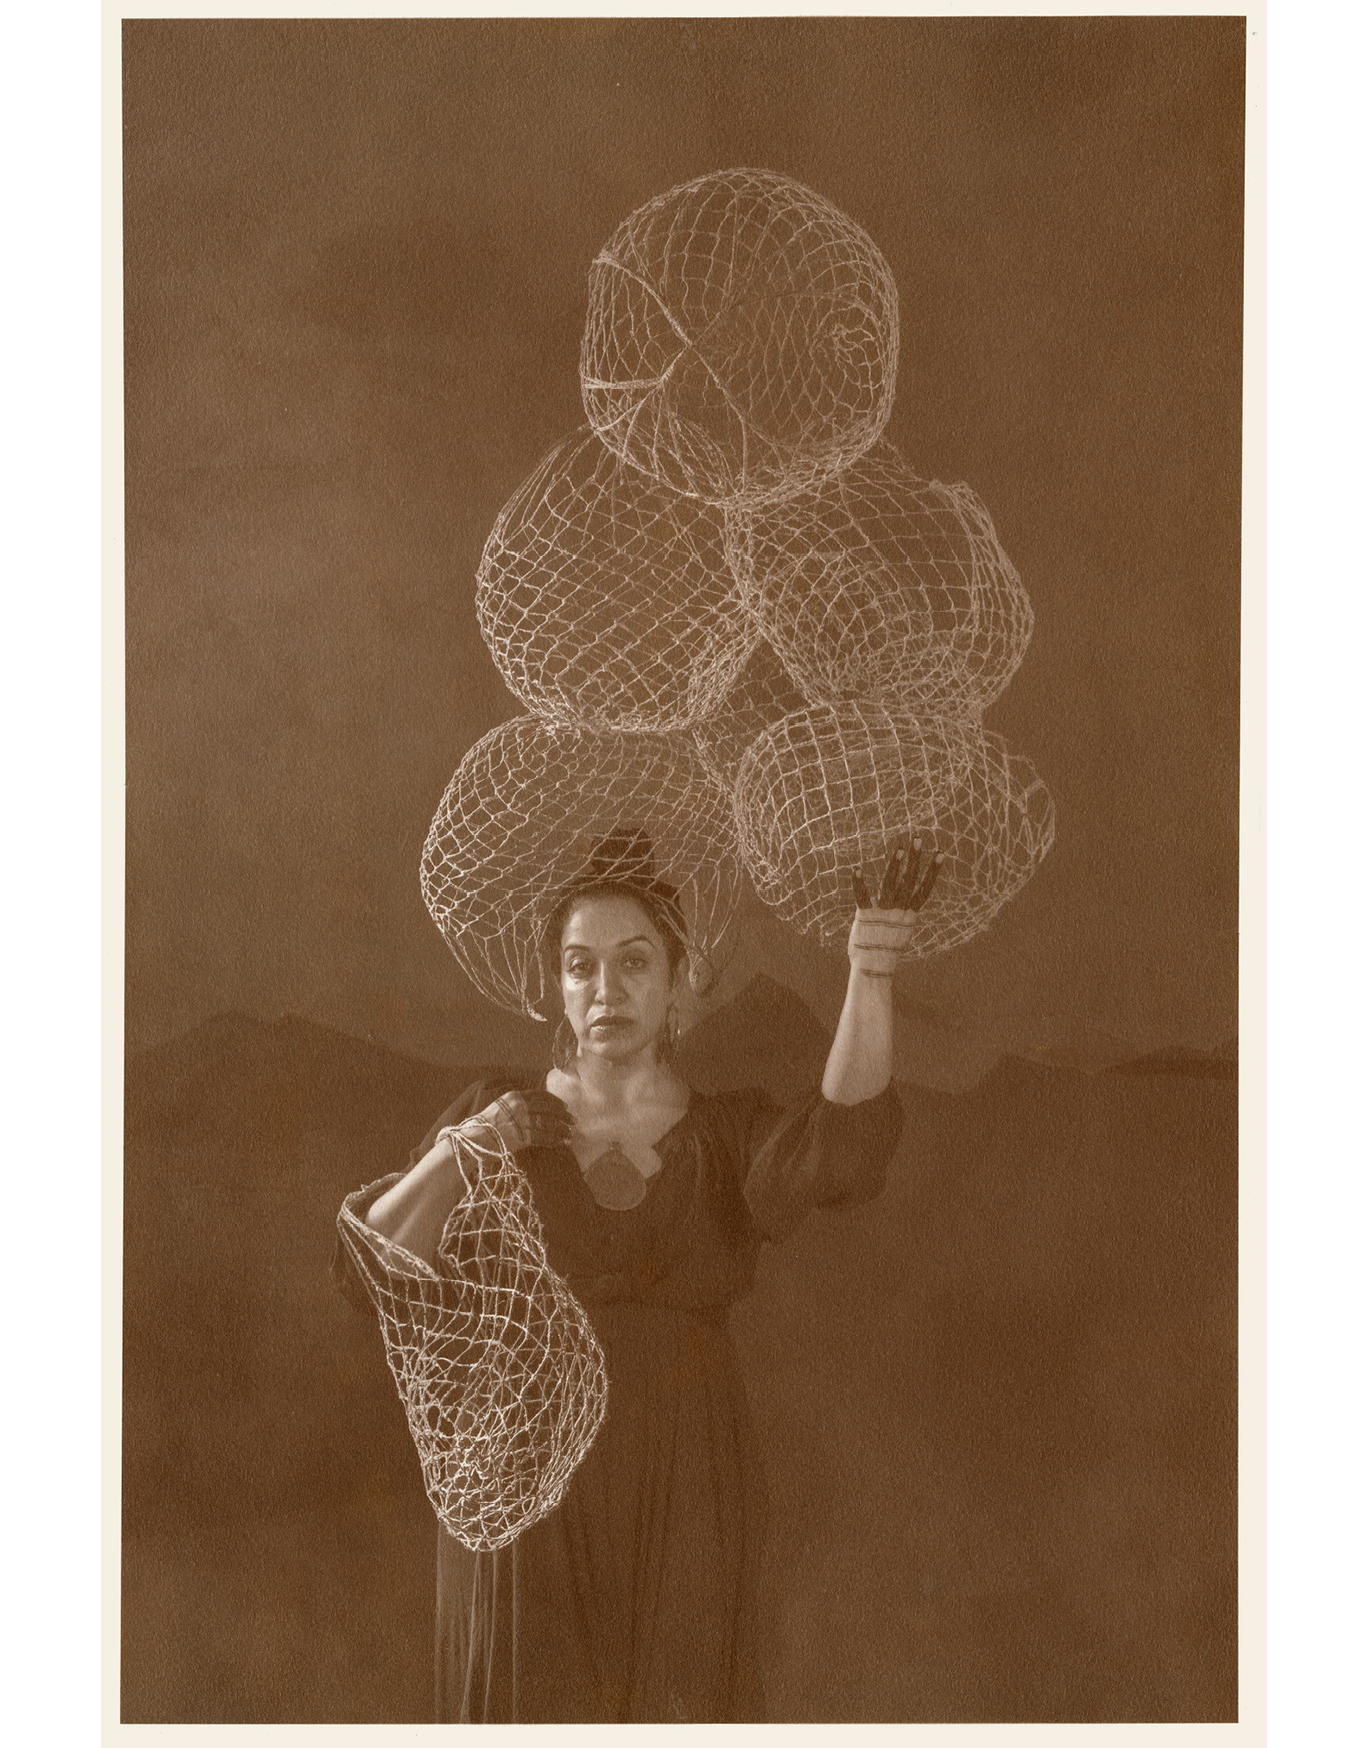 Brown toned photographic portrait of a woman, holding a stack of woven jute baskets over head, and carried on one arm. It appears the circular baskets are filled with an empty space. Her hands have henna black stripes printed on them.